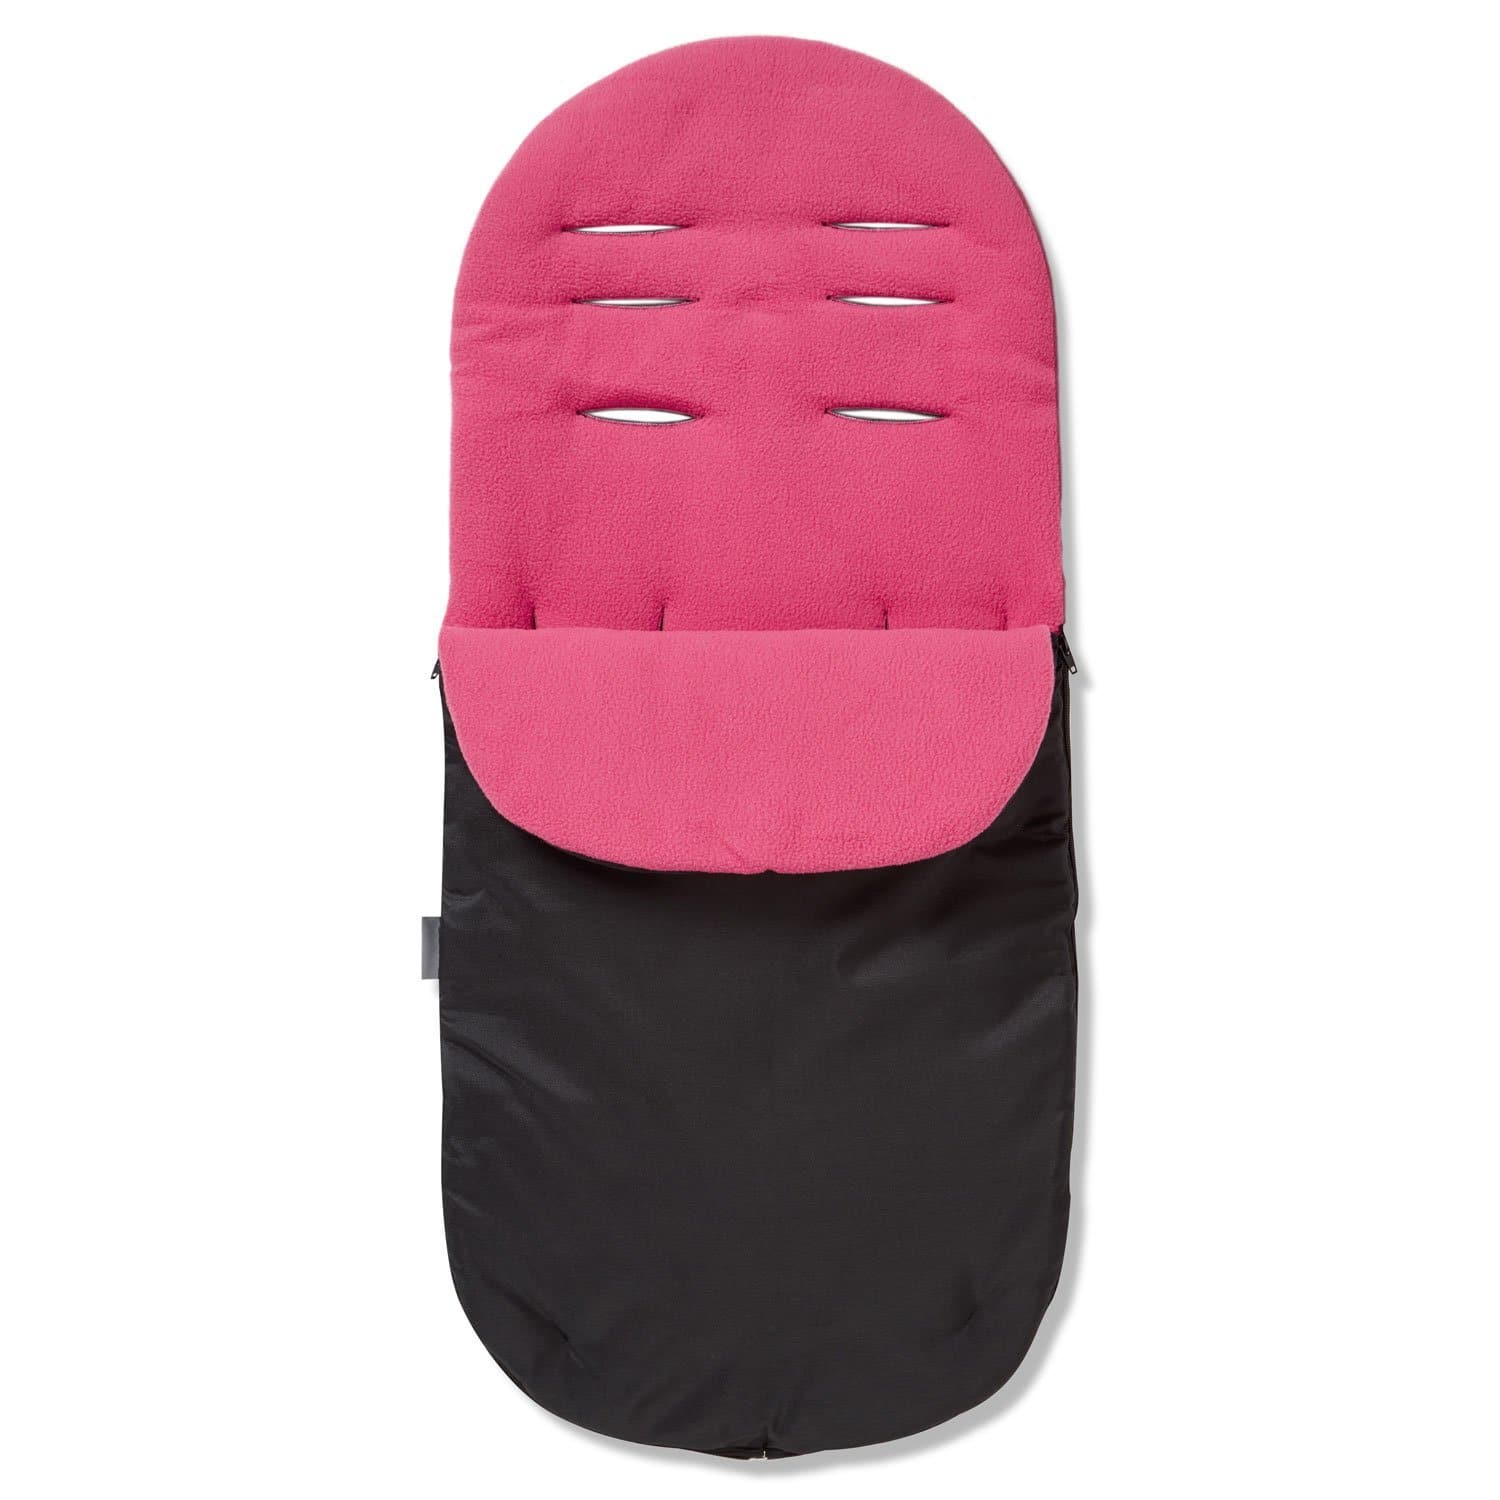 Footmuff / Cosy Toes Compatible with Kiddy - For Your Little One